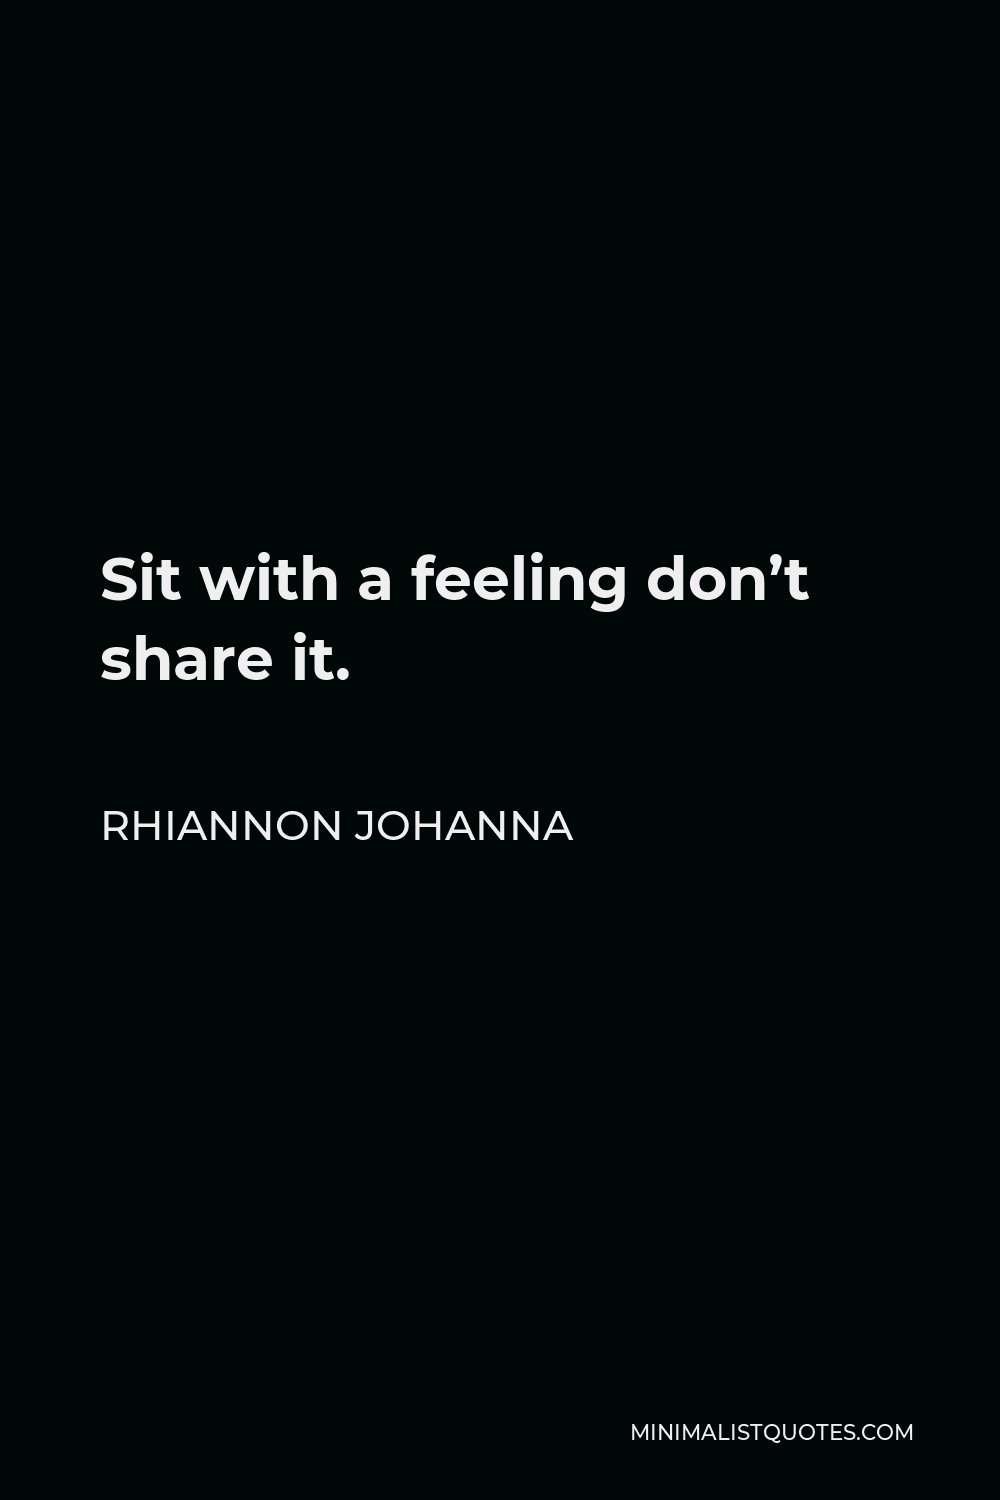 Rhiannon Johanna Quote - Sit with a feeling don’t share it.